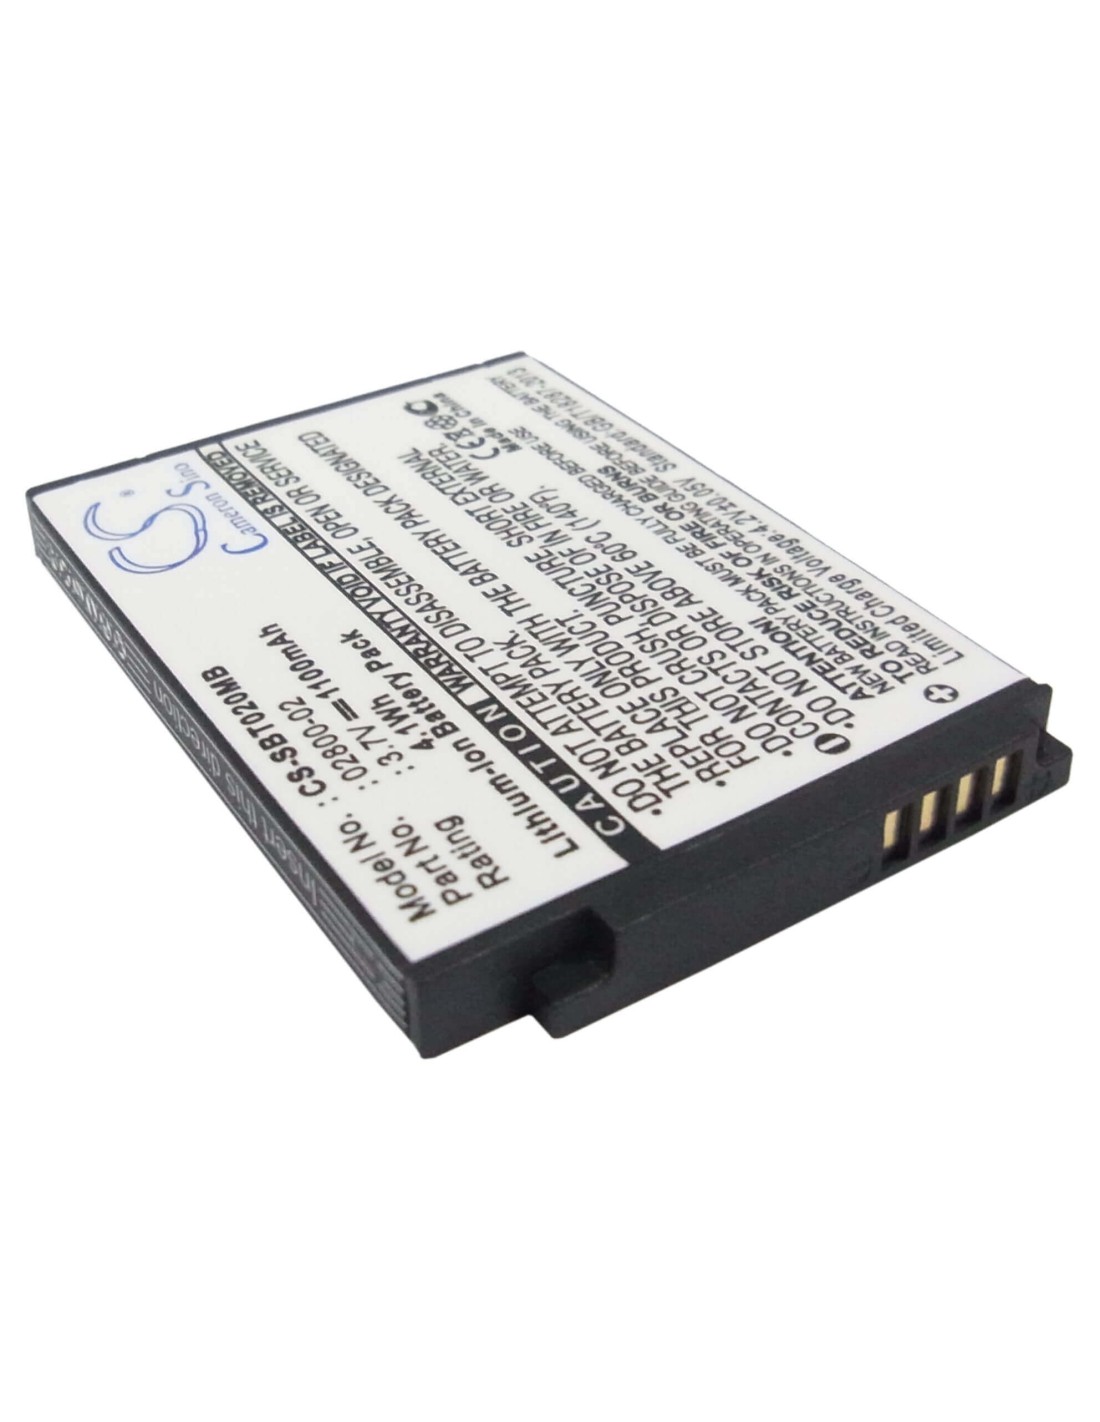 Battery for Summer Baby, Baby Touch 02000, Baby Touch 02004 3.7V, 1100mAh - 4.07Wh